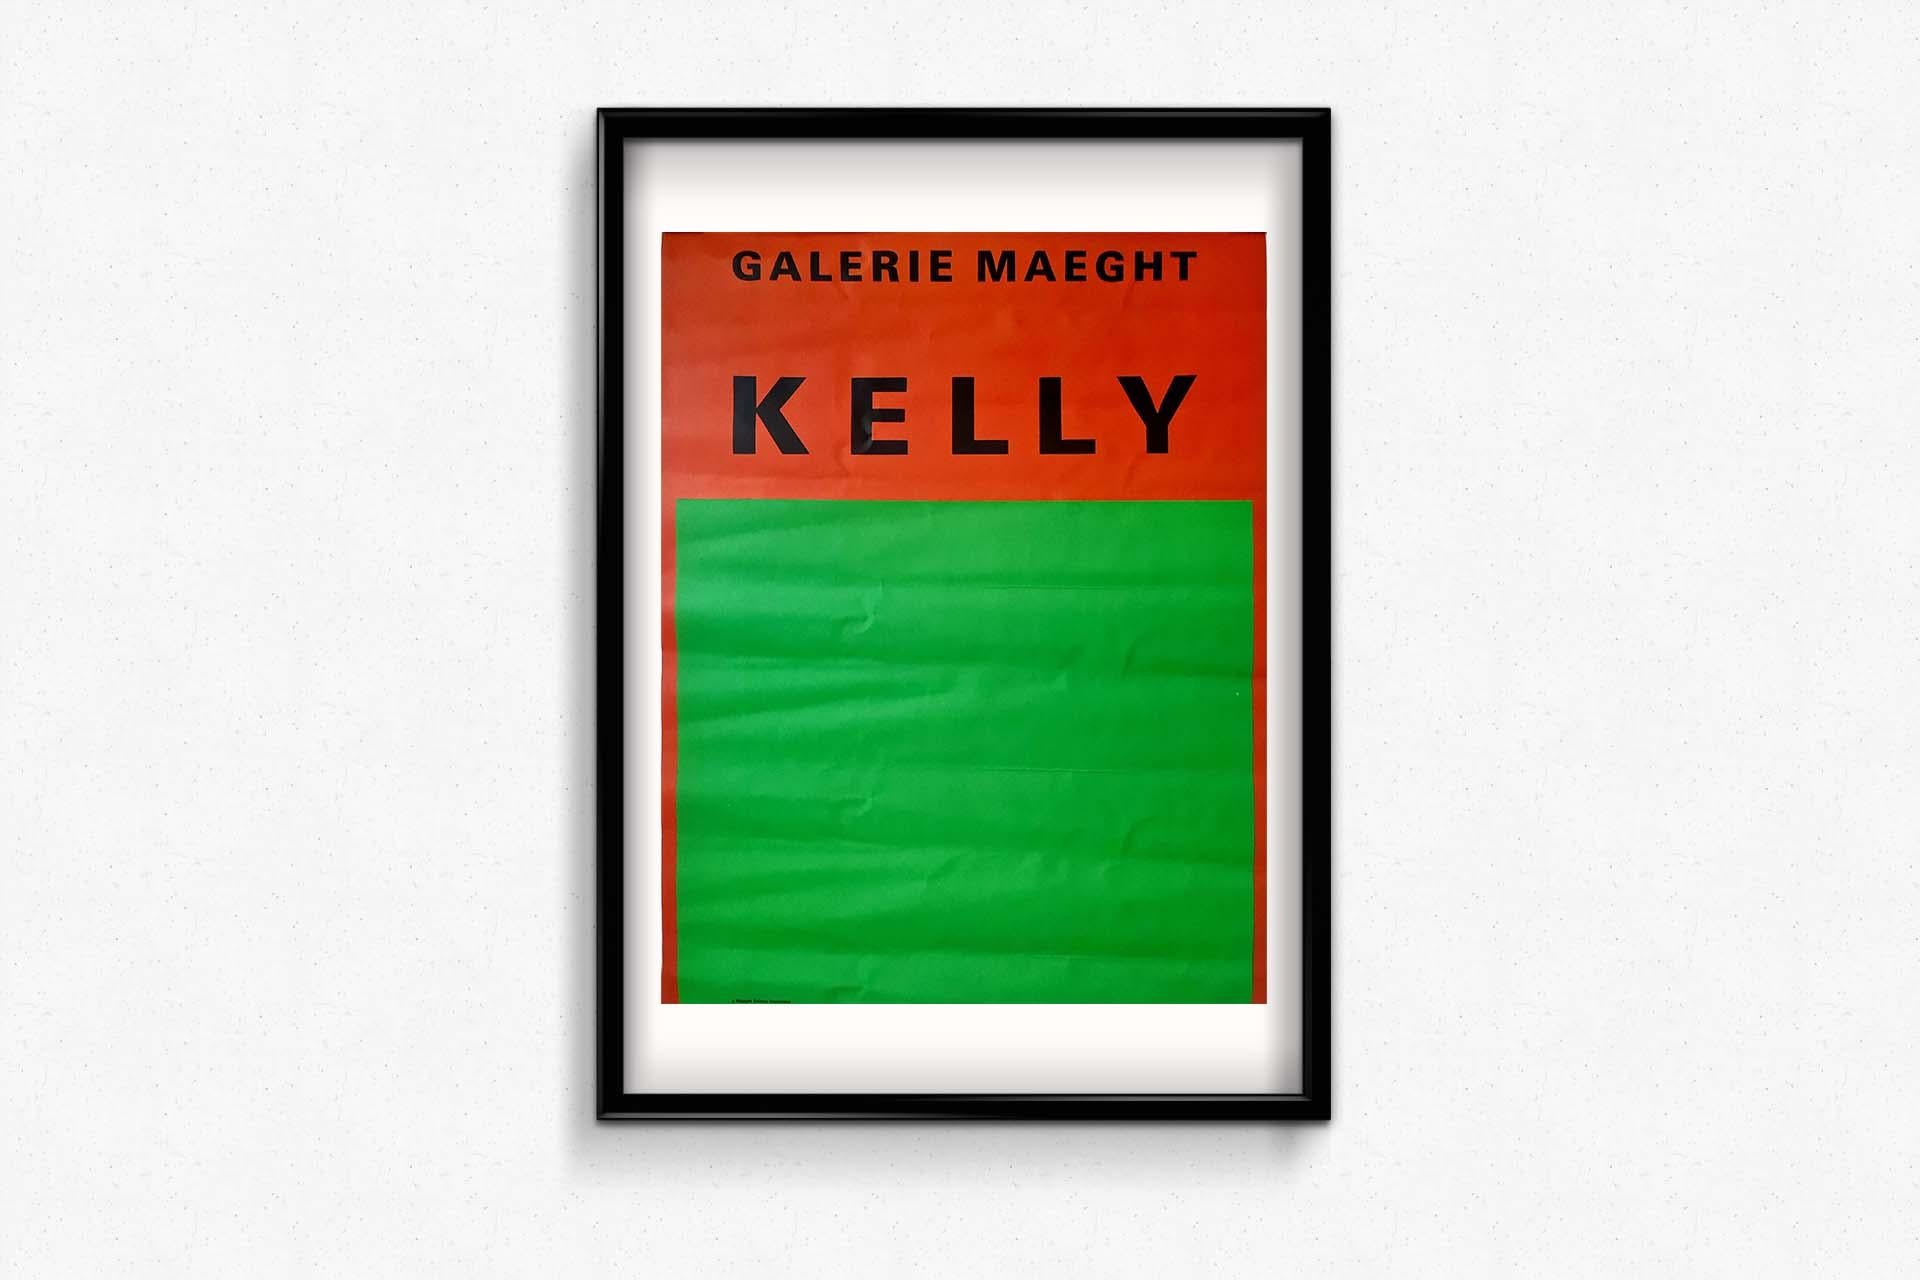 Original poster made by Ellsworth Kelly in original Lithography, for his exhibition at the Maeght Gallery in 1964. Ellsworth Kelly was an American painter, sculptor and printmaker associated with hard-edge painting, Color Field painting and